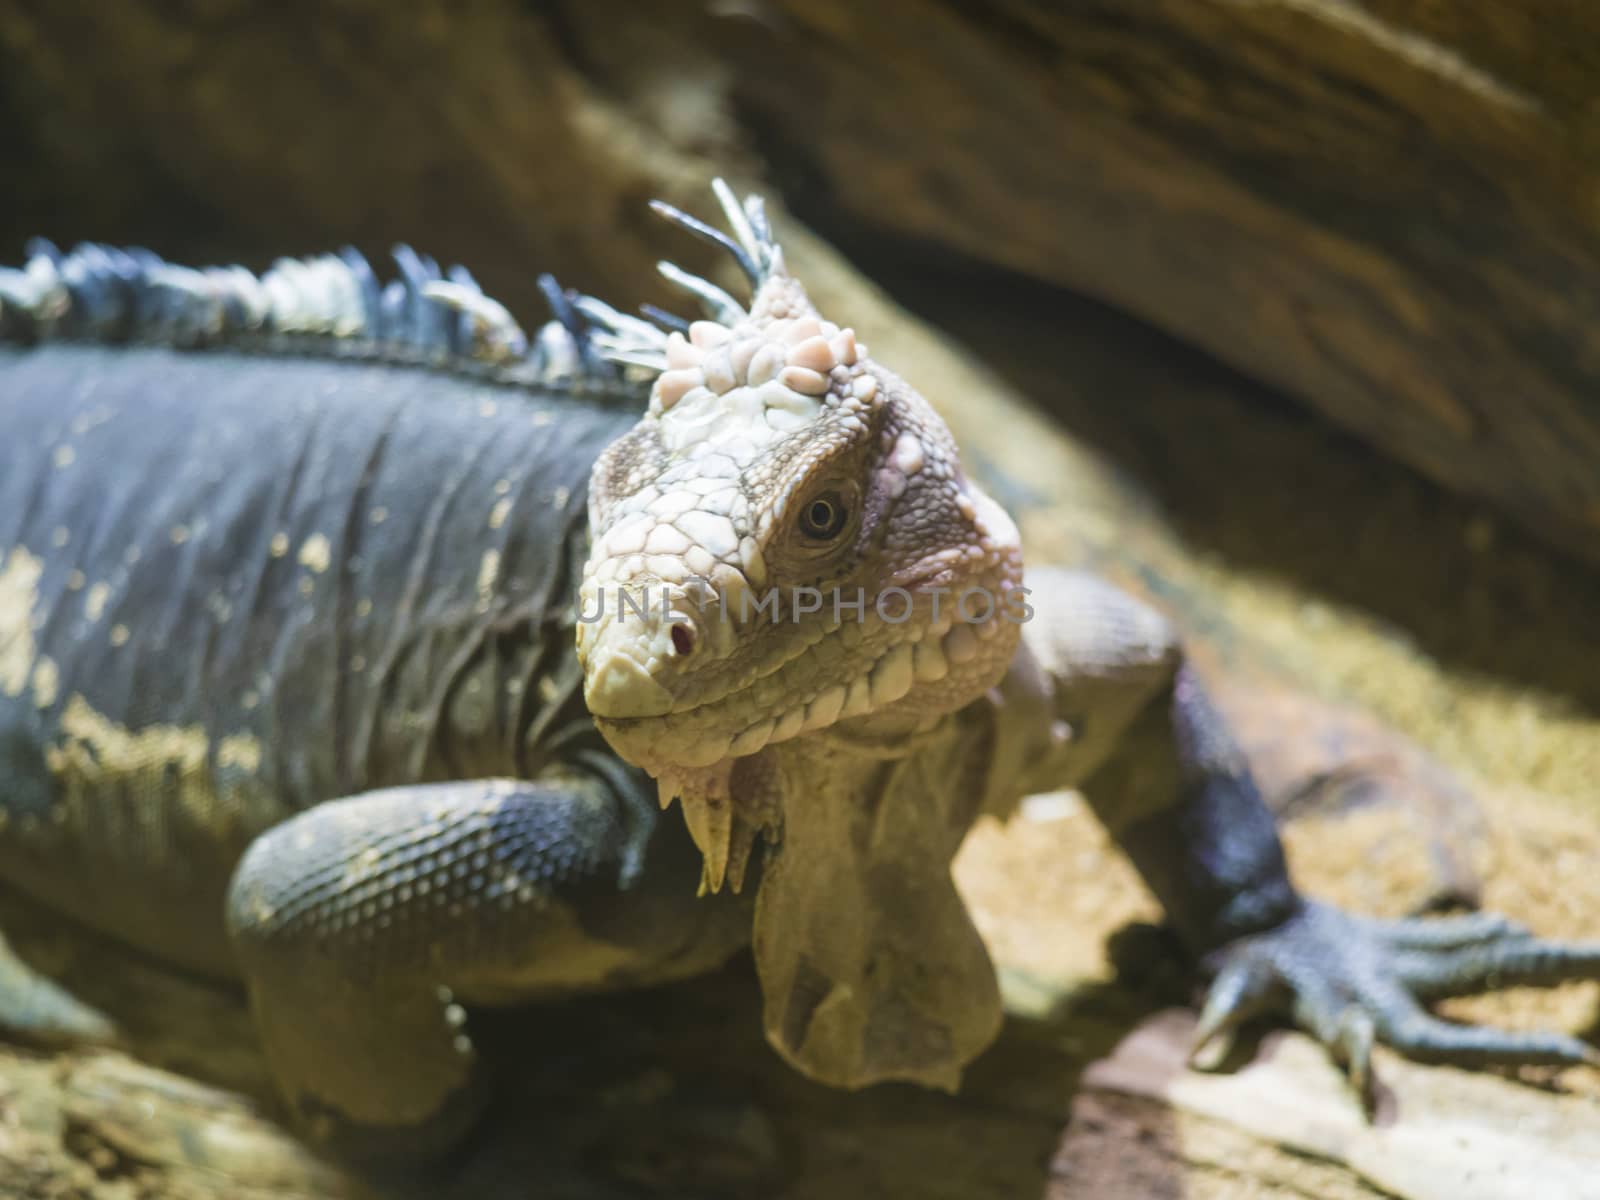 Close up portrait of a lesser Antillean iguana. Igauana delicatissima is a large arboreal lizard endemic to the Lesser Antilles, critically endangered large arboreal lizard. Selective focus on eye. by Henkeova